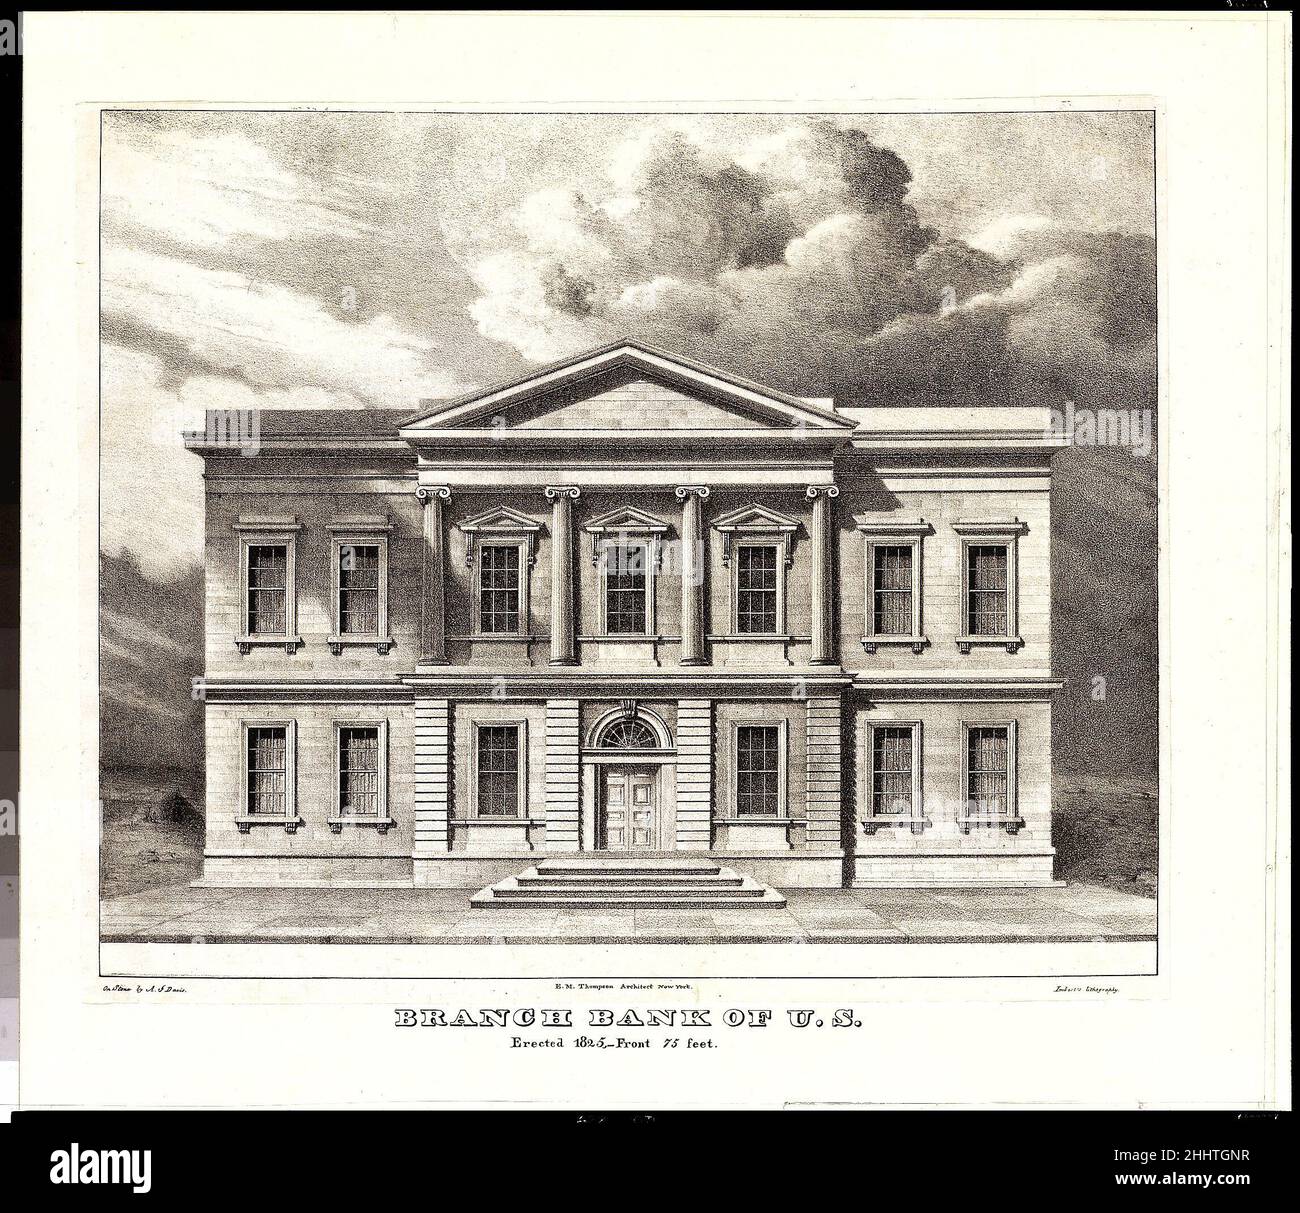 The Branch Bank of the United States, Wall Street, New York, Erected in 1825 (from Views of the Public Buildings in the City of New York Correctly Drawn on Stone by A. J. Davis, 1827) 1826–28 Anthony Imbert American. The Branch Bank of the United States, Wall Street, New York, Erected in 1825 (from Views of the Public Buildings in the City of New York Correctly Drawn on Stone by A. J. Davis, 1827). After Alexander Jackson Davis (American, New York 1803–1892 West Orange, New Jersey). 1826–28. Lithograph. Prints Stock Photo